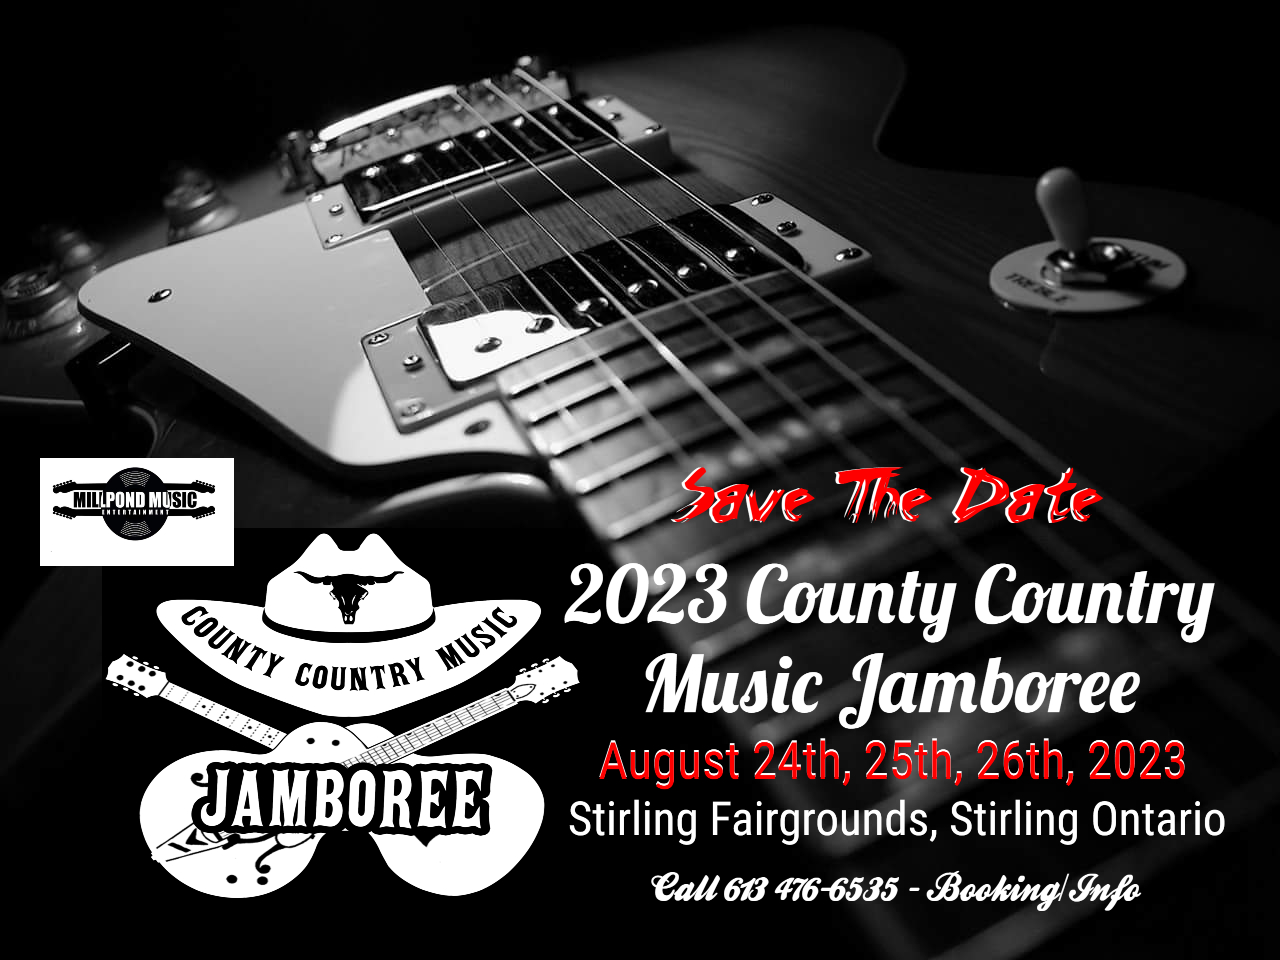 The 2023 Crowe Valley Country Jamboree MillPond Music & Entertainment Inc